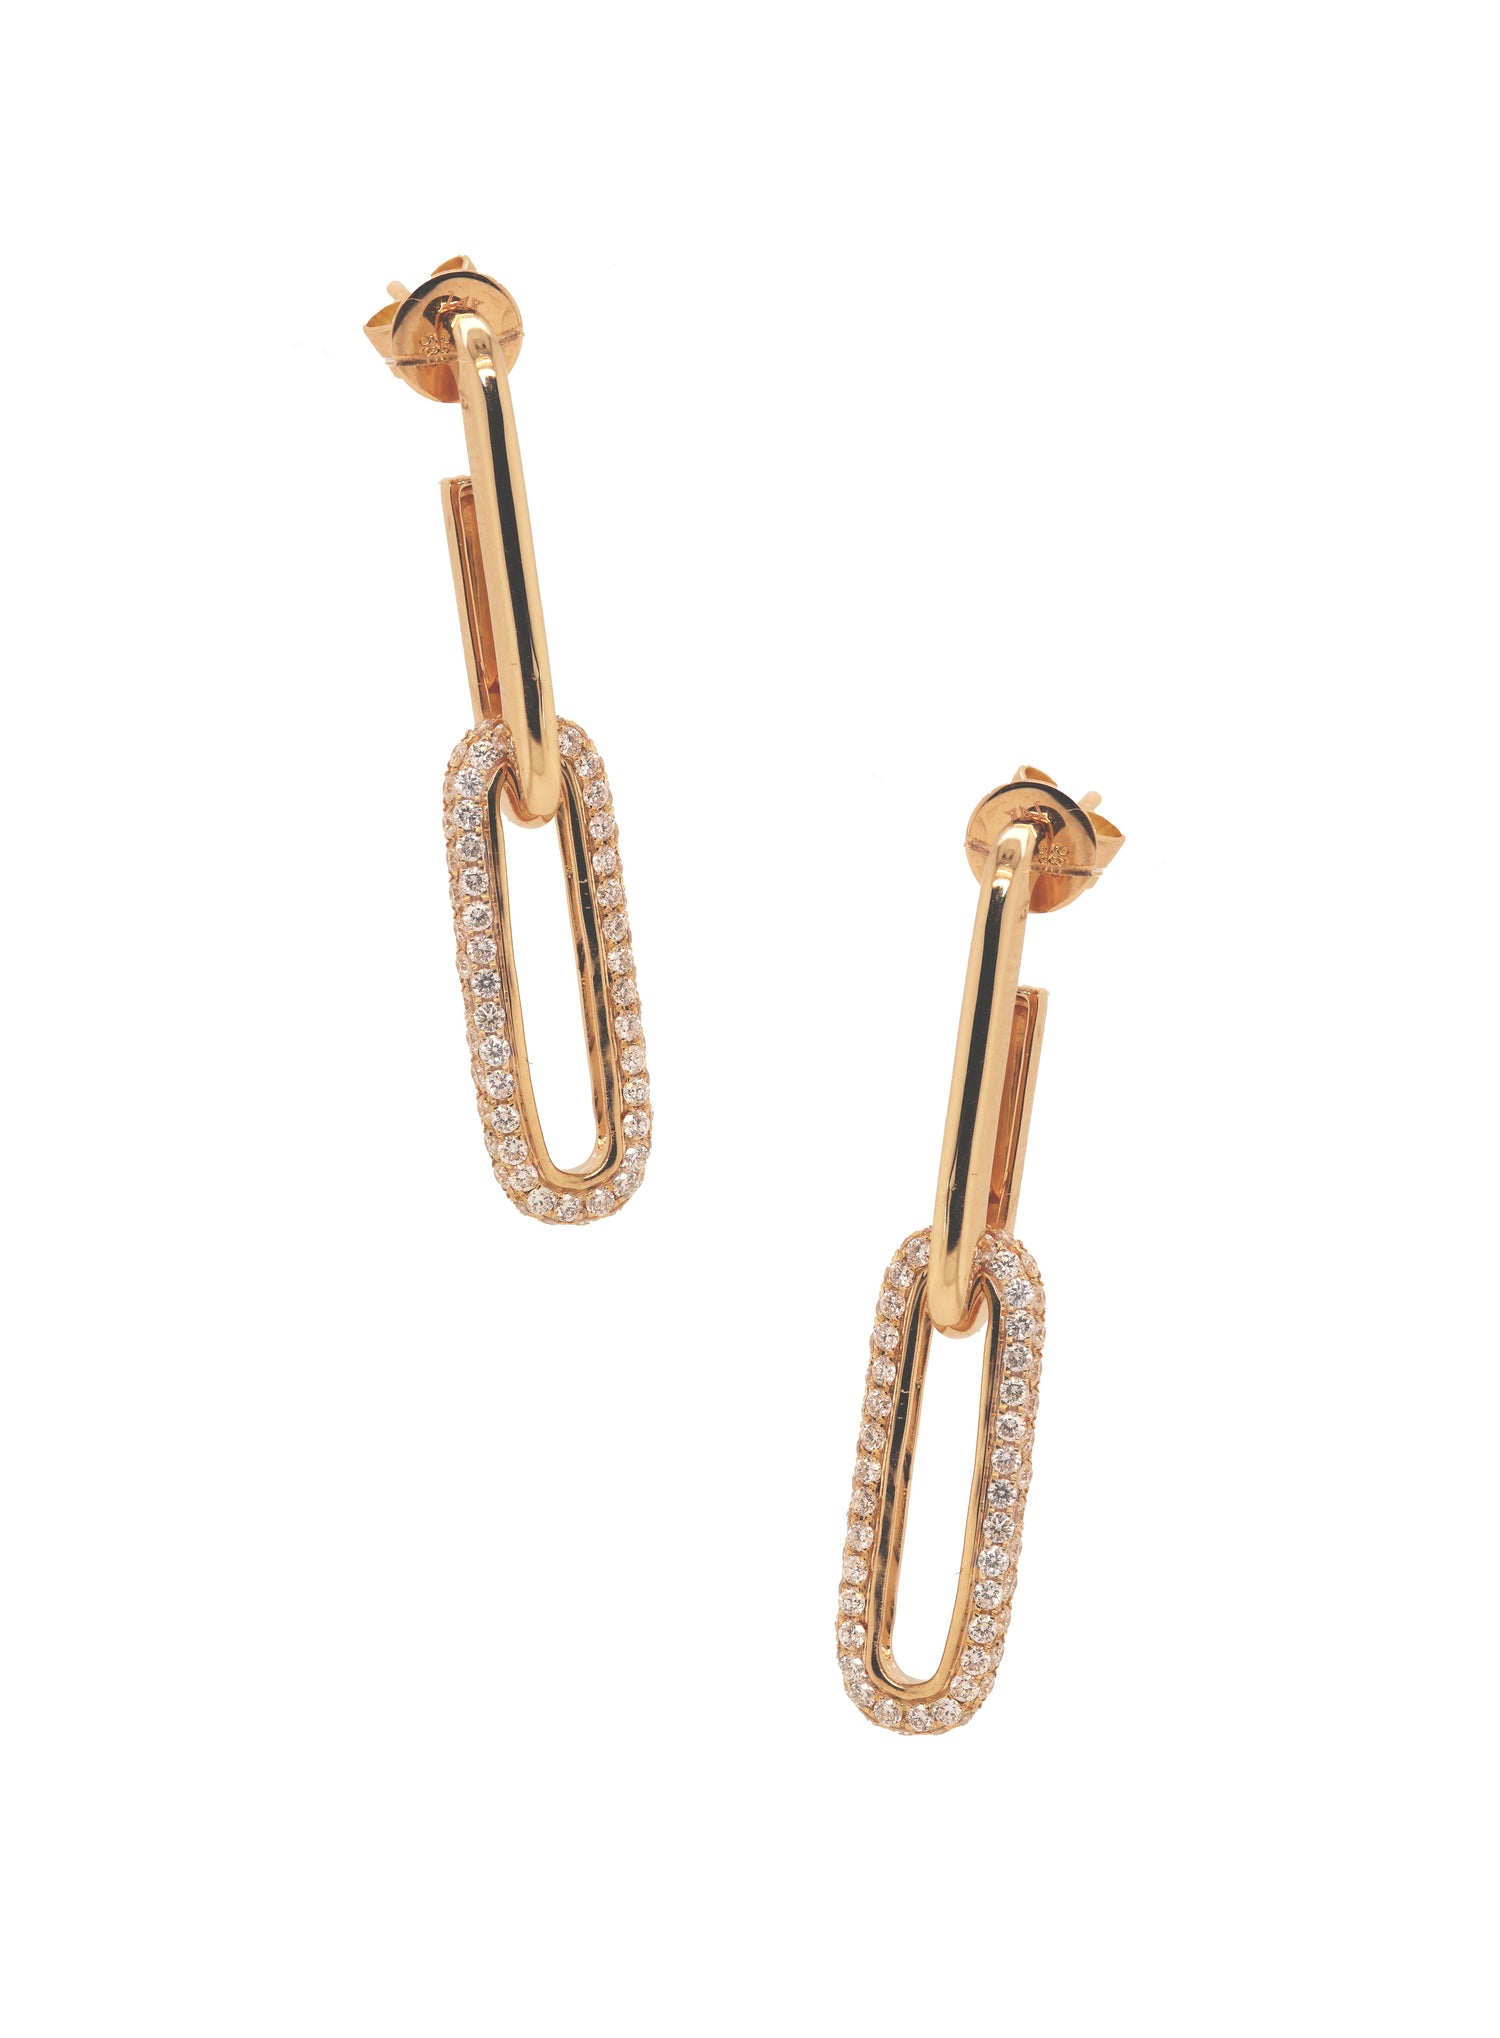 14K chain link earrings with bottom link adorned with 2.46 ct diamonds